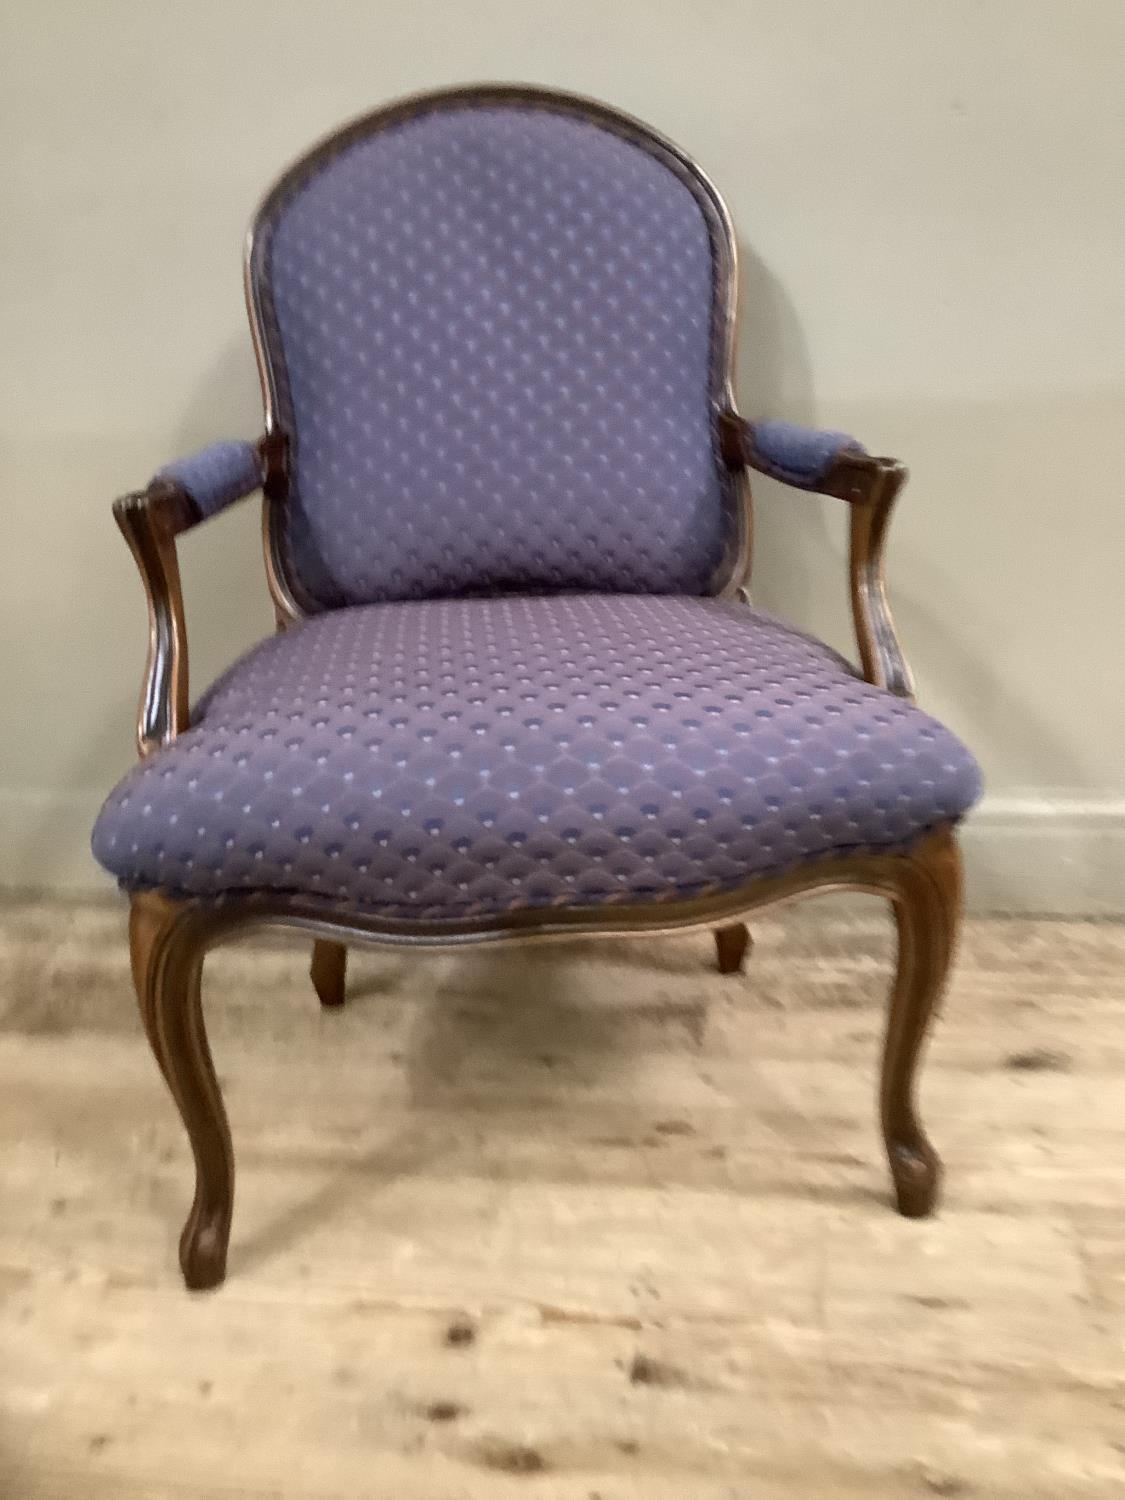 A reproduction French style open armchair on cabriole legs, upholstered in blue and orange scalloped - Image 3 of 5